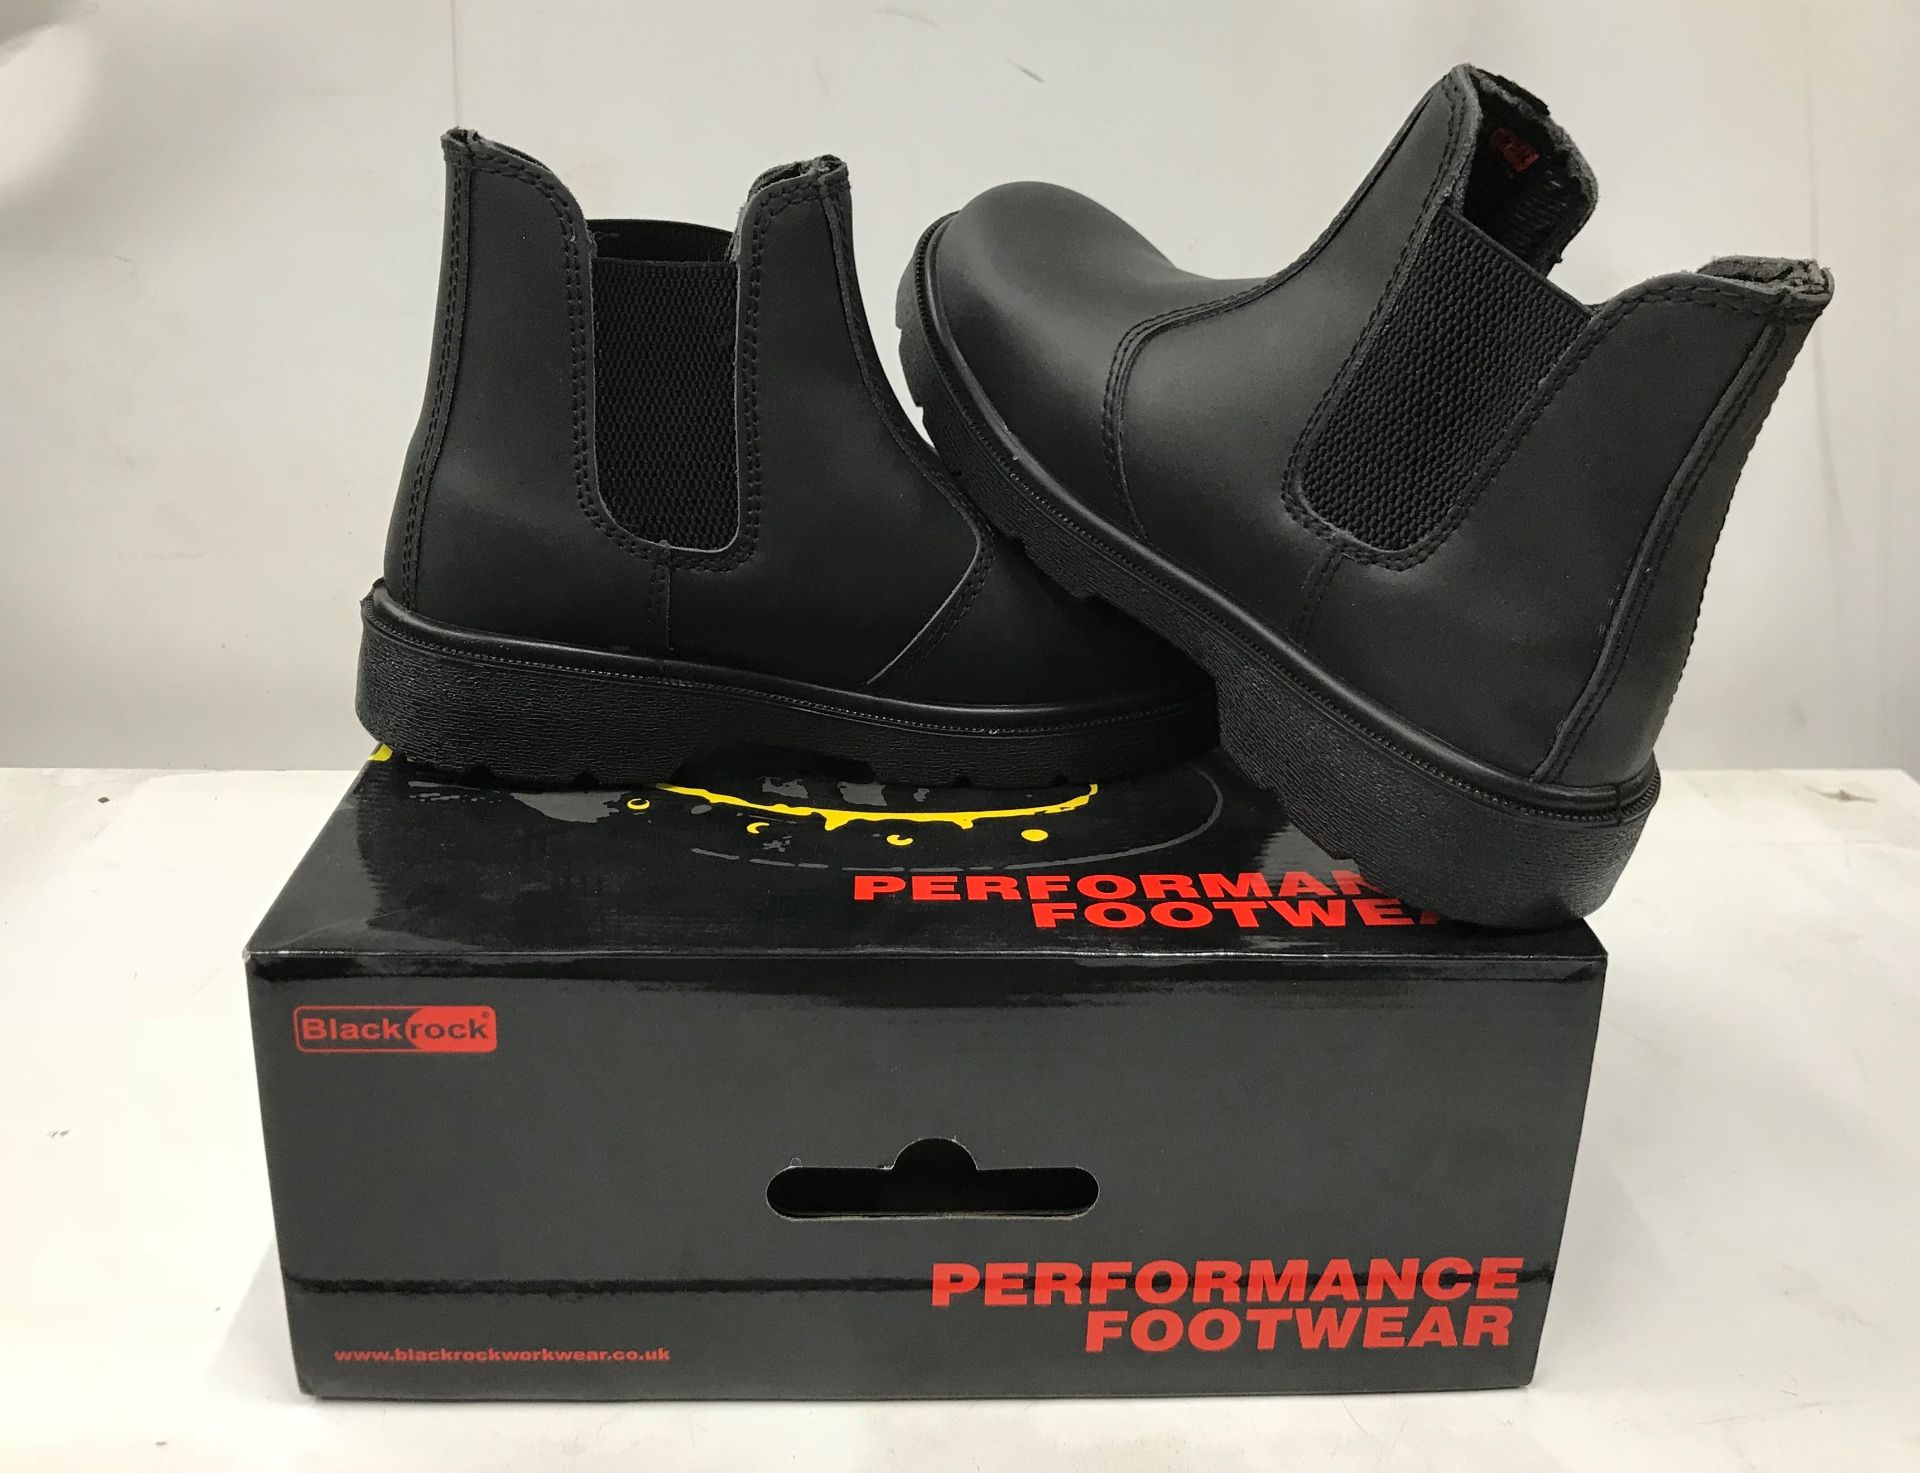 59 x Pairs of Steel-toe Capped Safety Boots - Brands inc DIckies & Blackrock